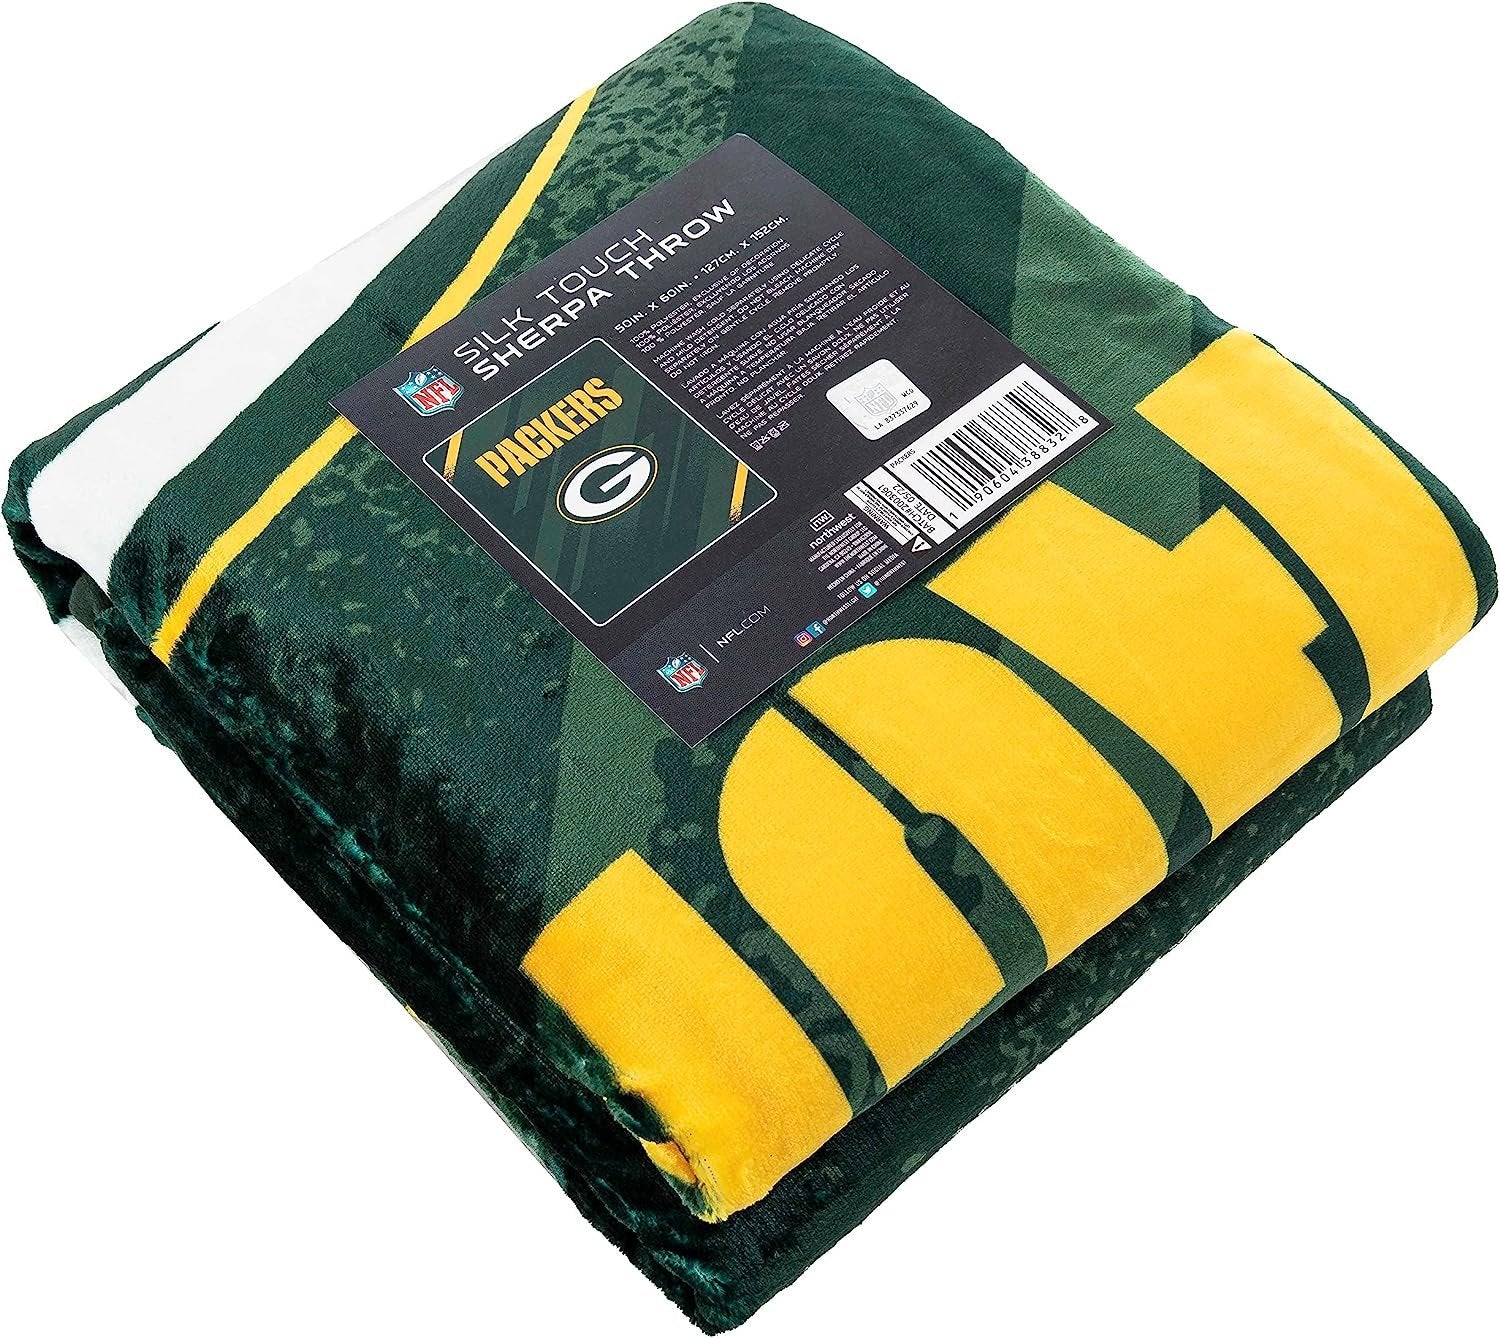 Green Bay Packers Throw Blanket, Sherpa Raschel Polyester, Silk Touch Style, Velocity Design, 50x60 Inch